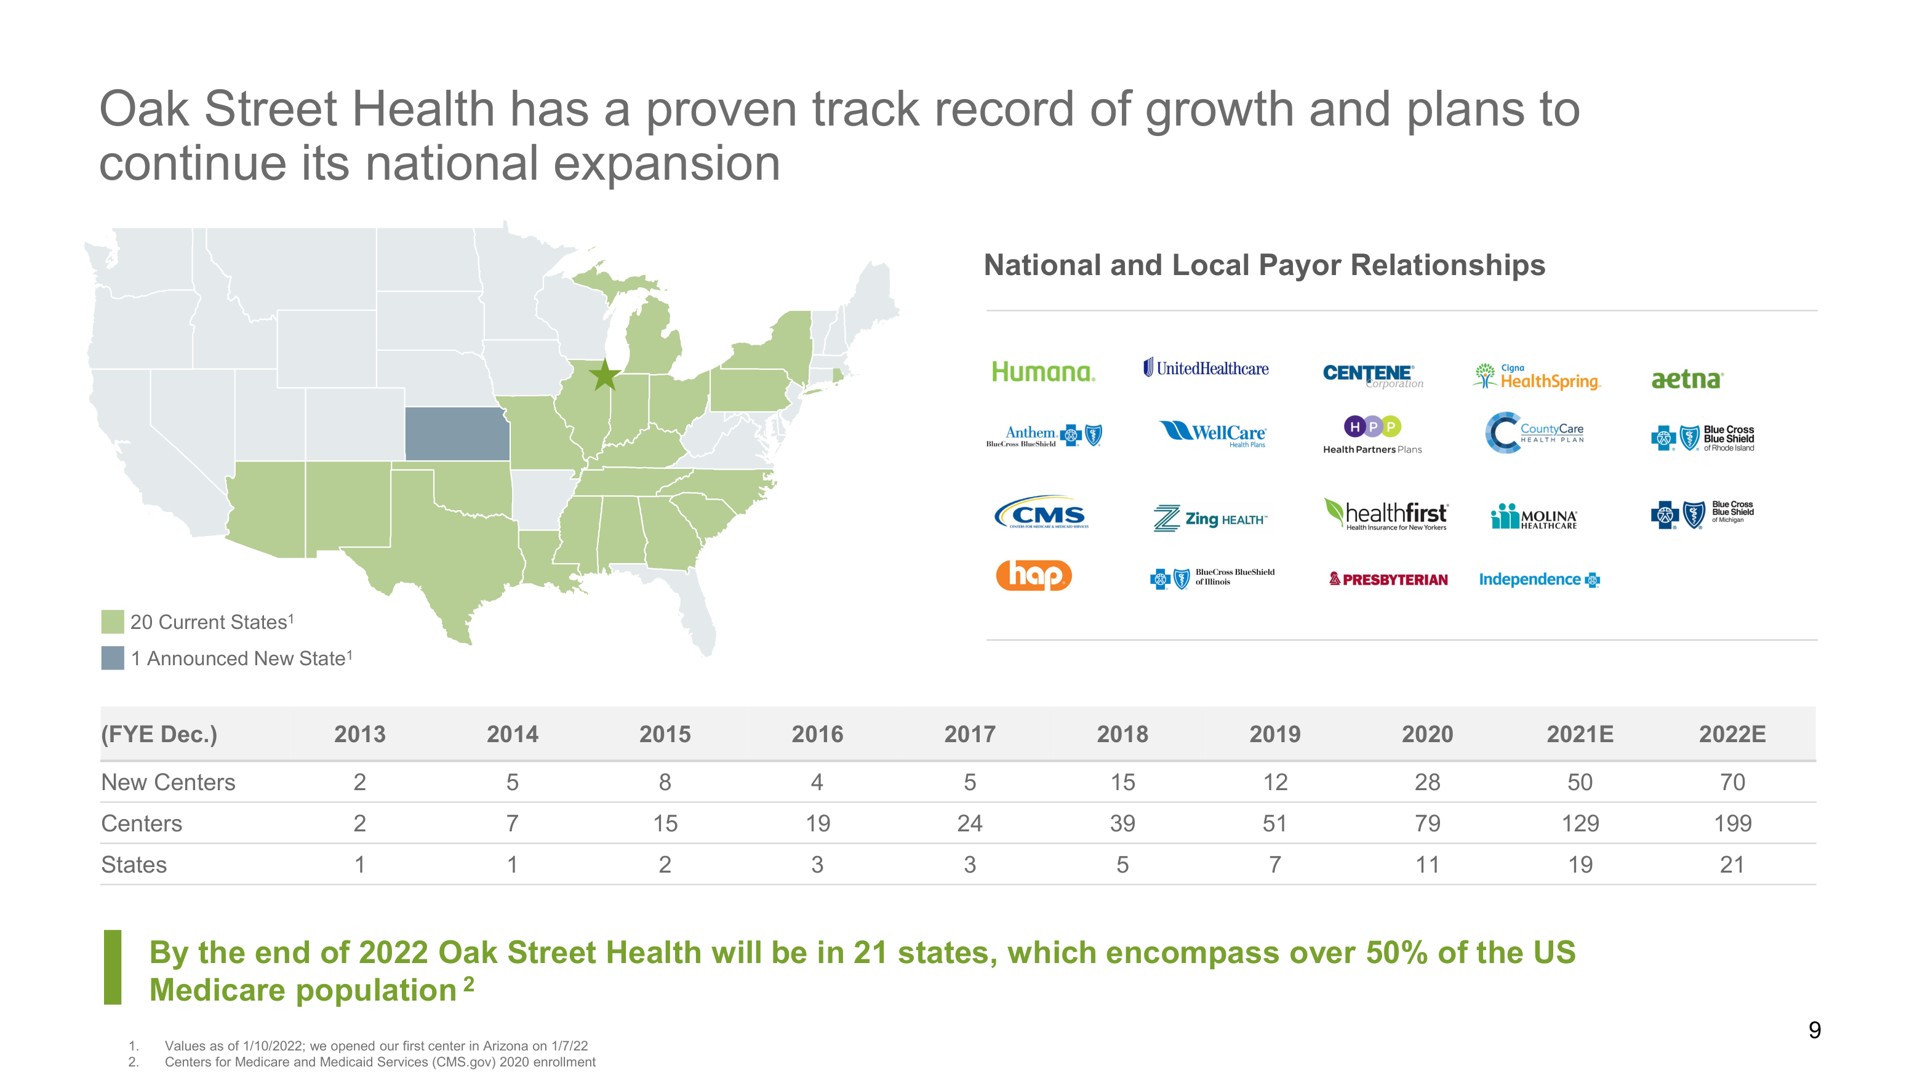 oak street health has a proven track record of growth and plans to continue its national expansion | Oak Street Health